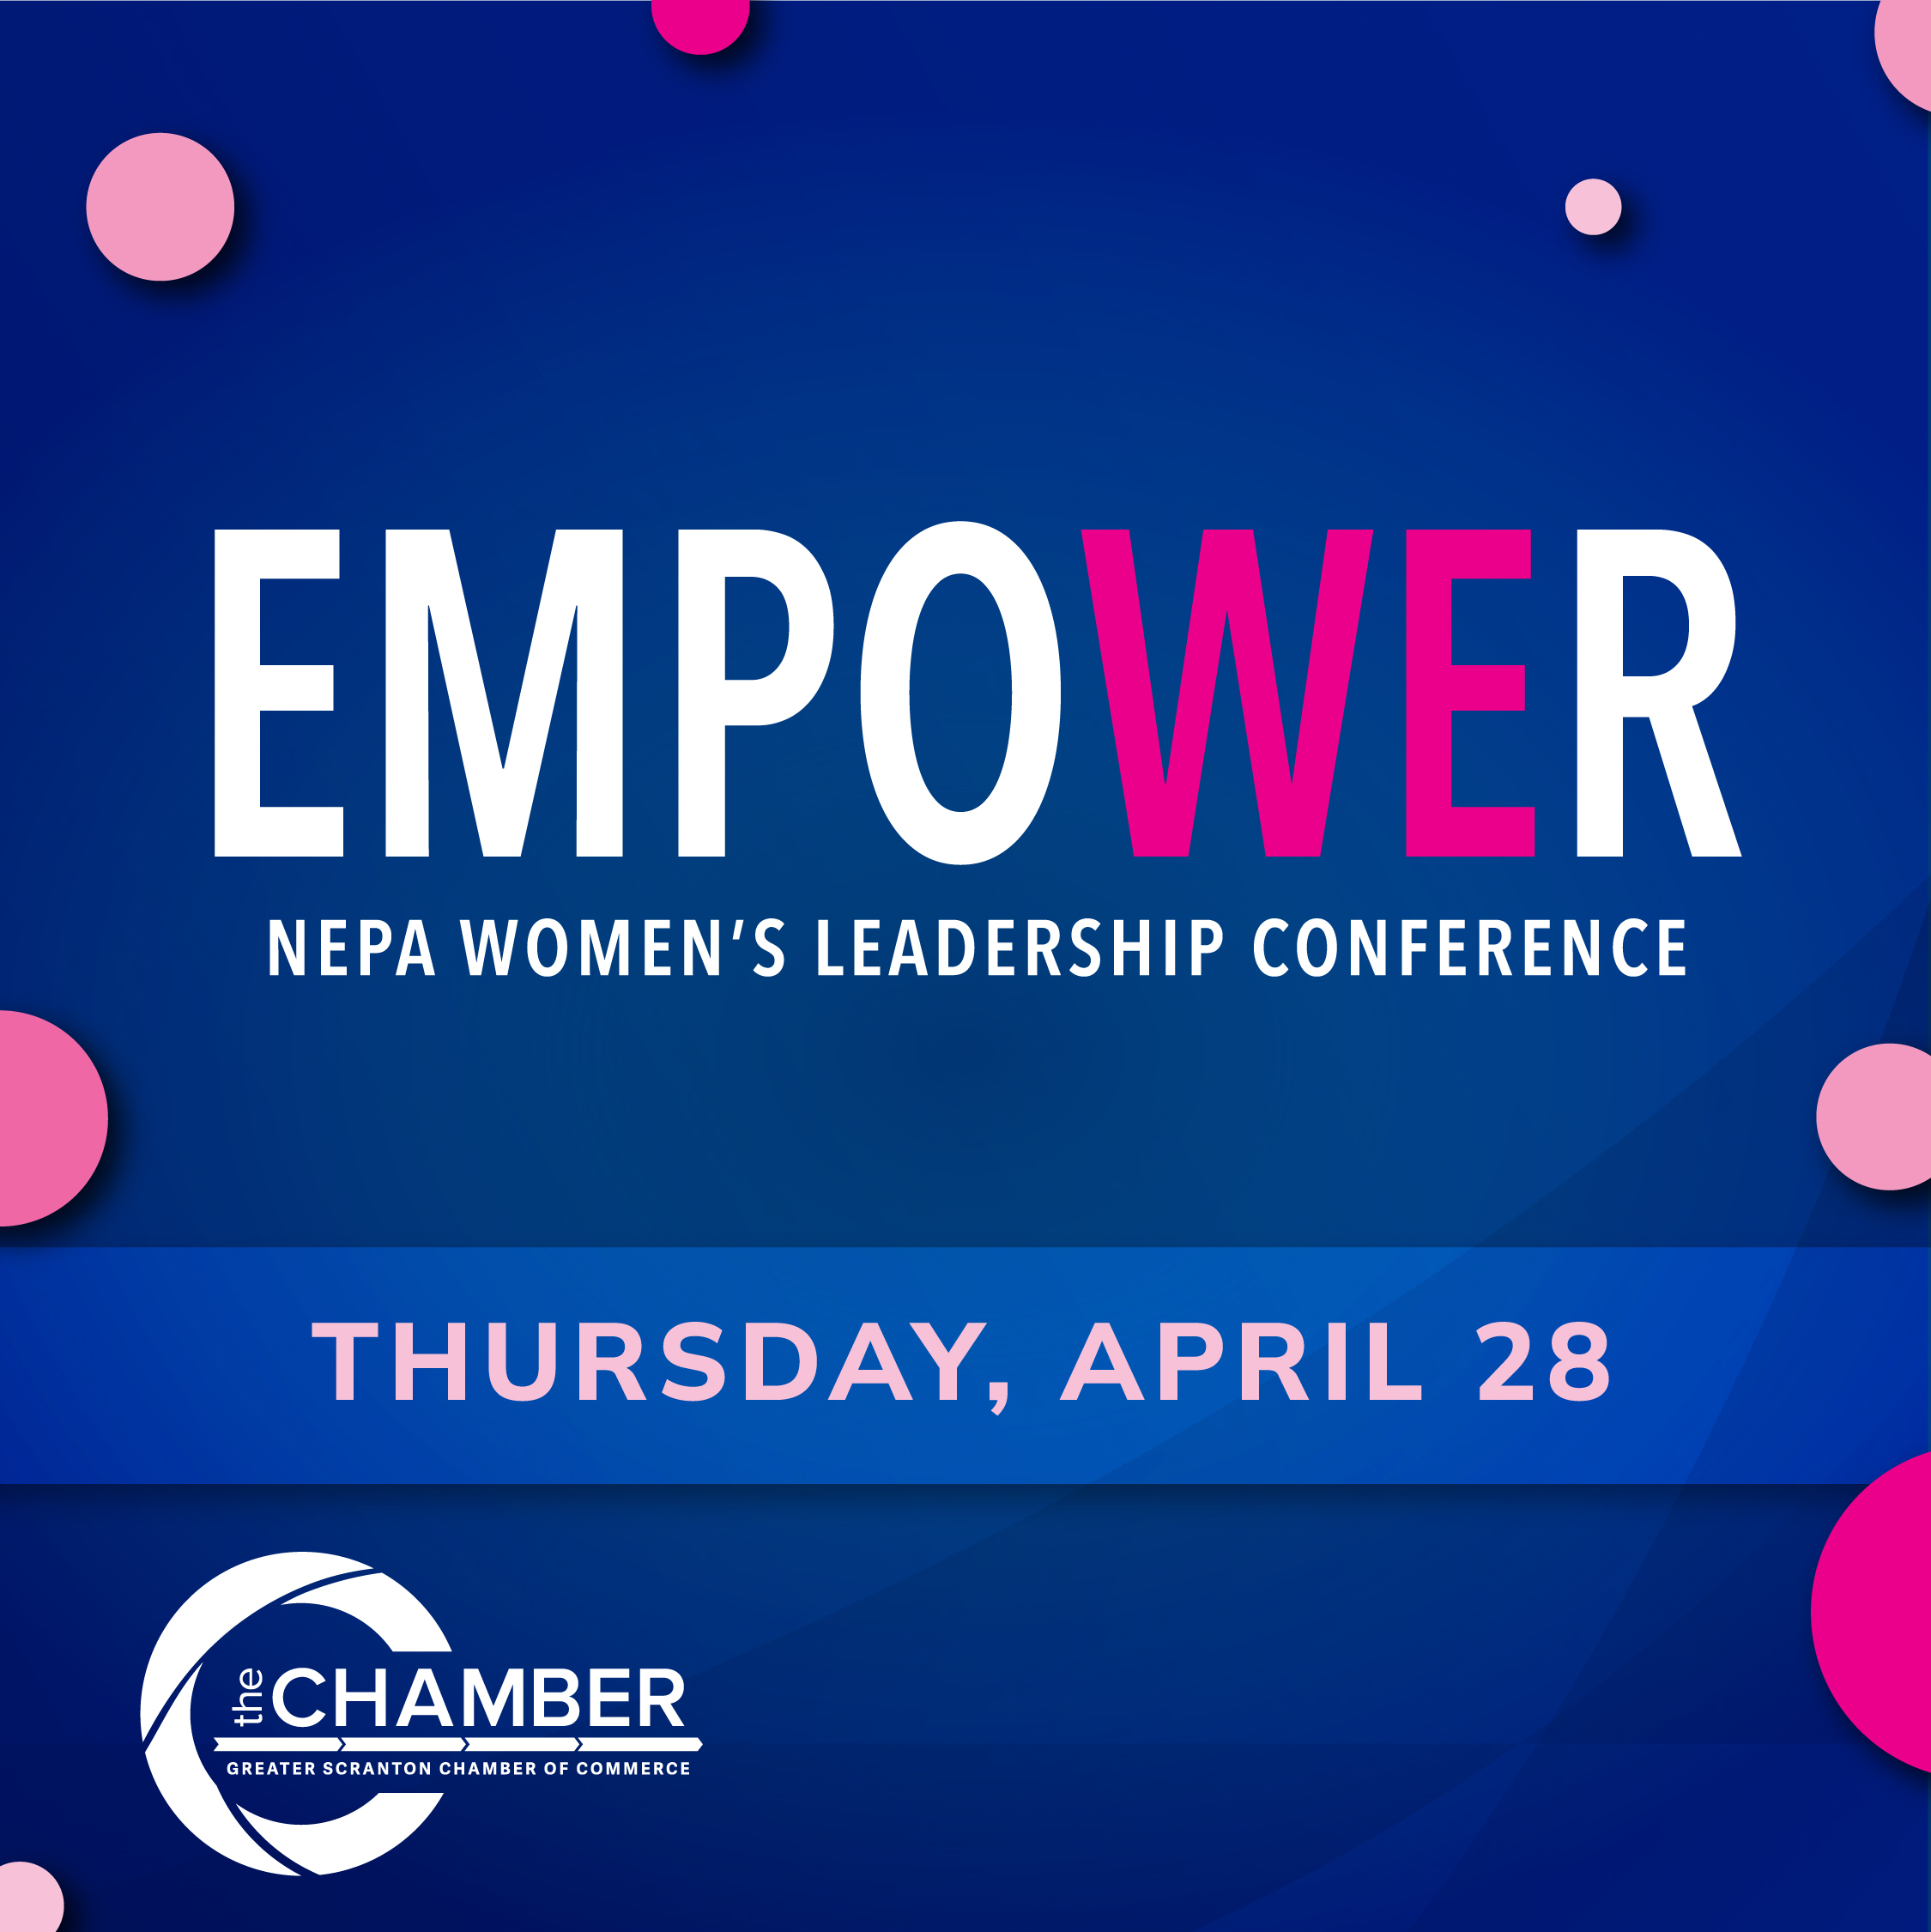 Empower Women's Leadership Conference logo